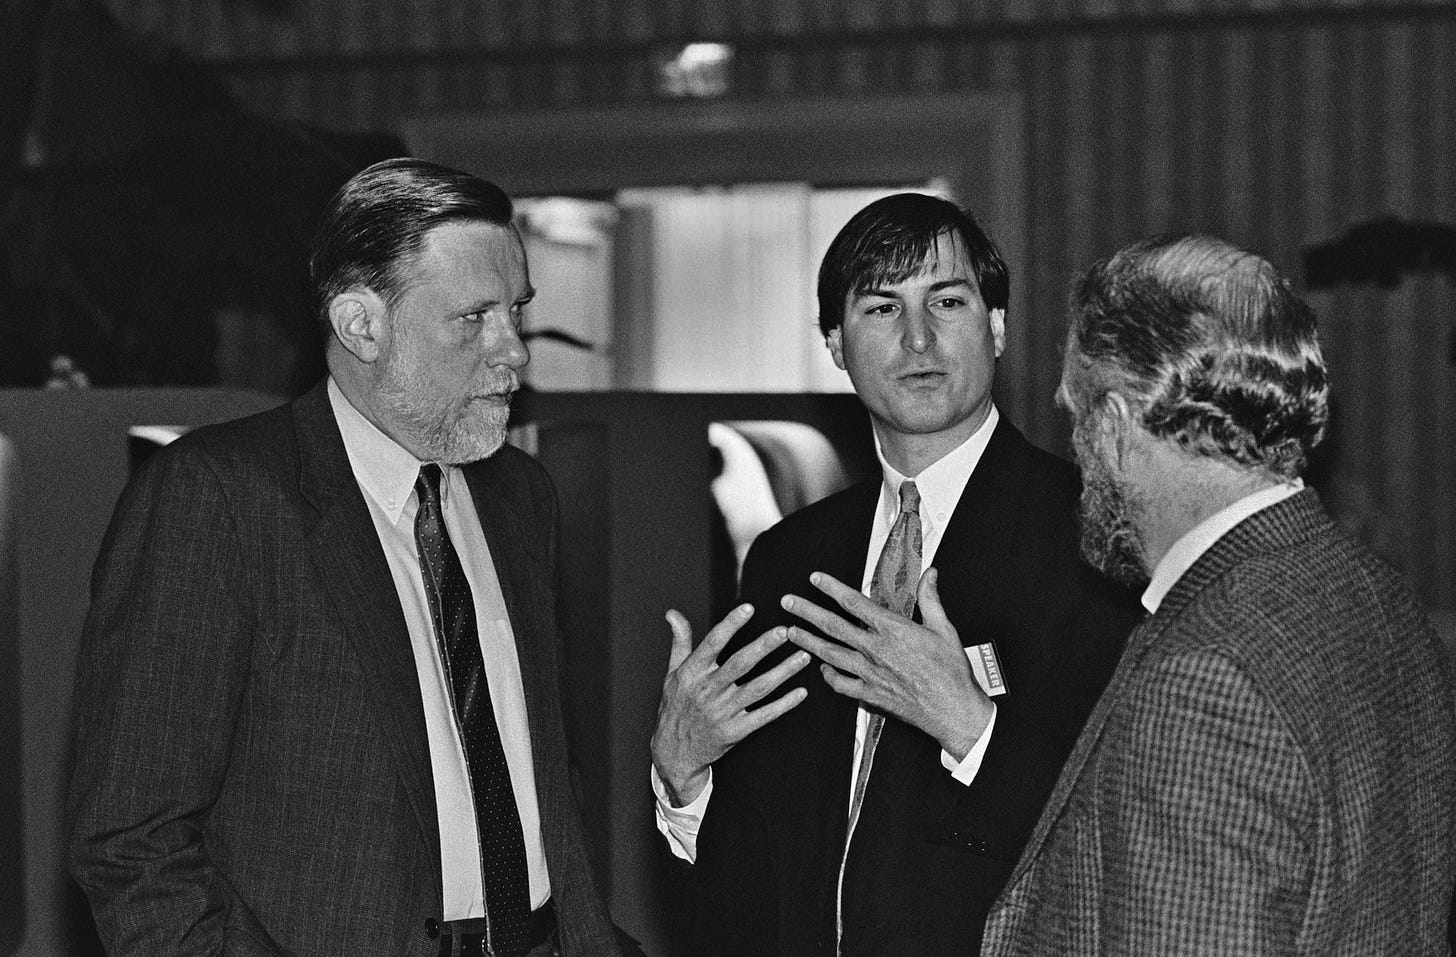 Here's a picture with Steve Jobs and the Adobe founders Chuck Geschke and  John Warnock during a conference or a reunion. | 스티브 잡스, 사진